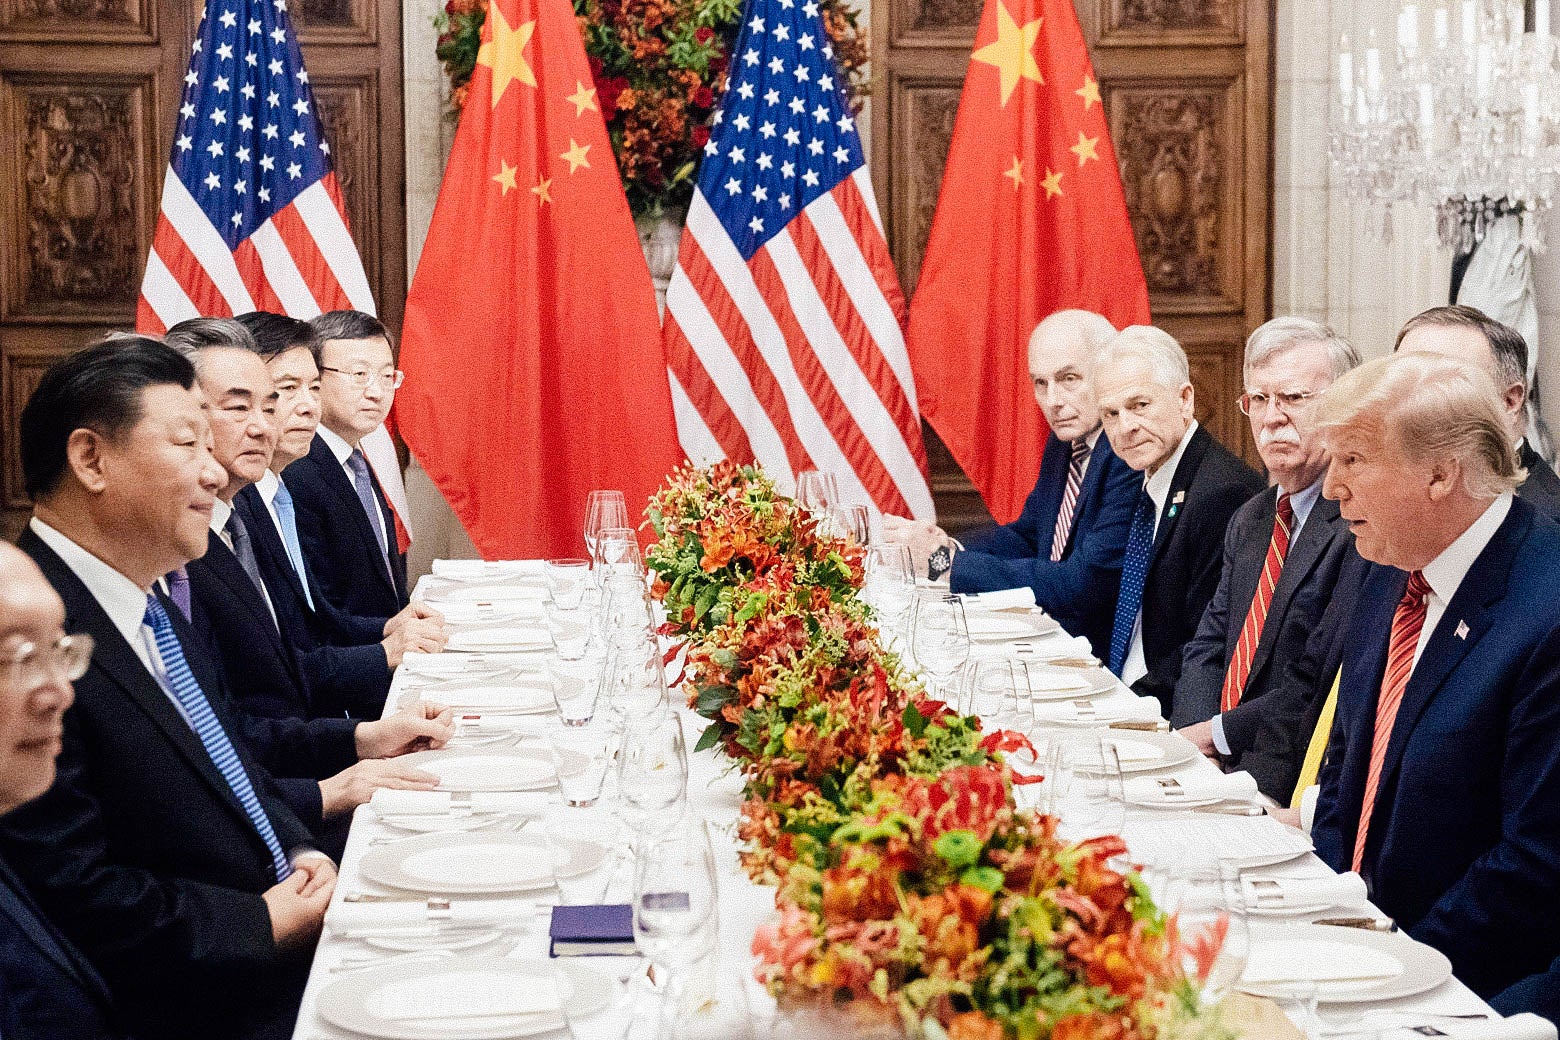 The arrest is sure to complicate the U.S.’s trade war negotiations with China.